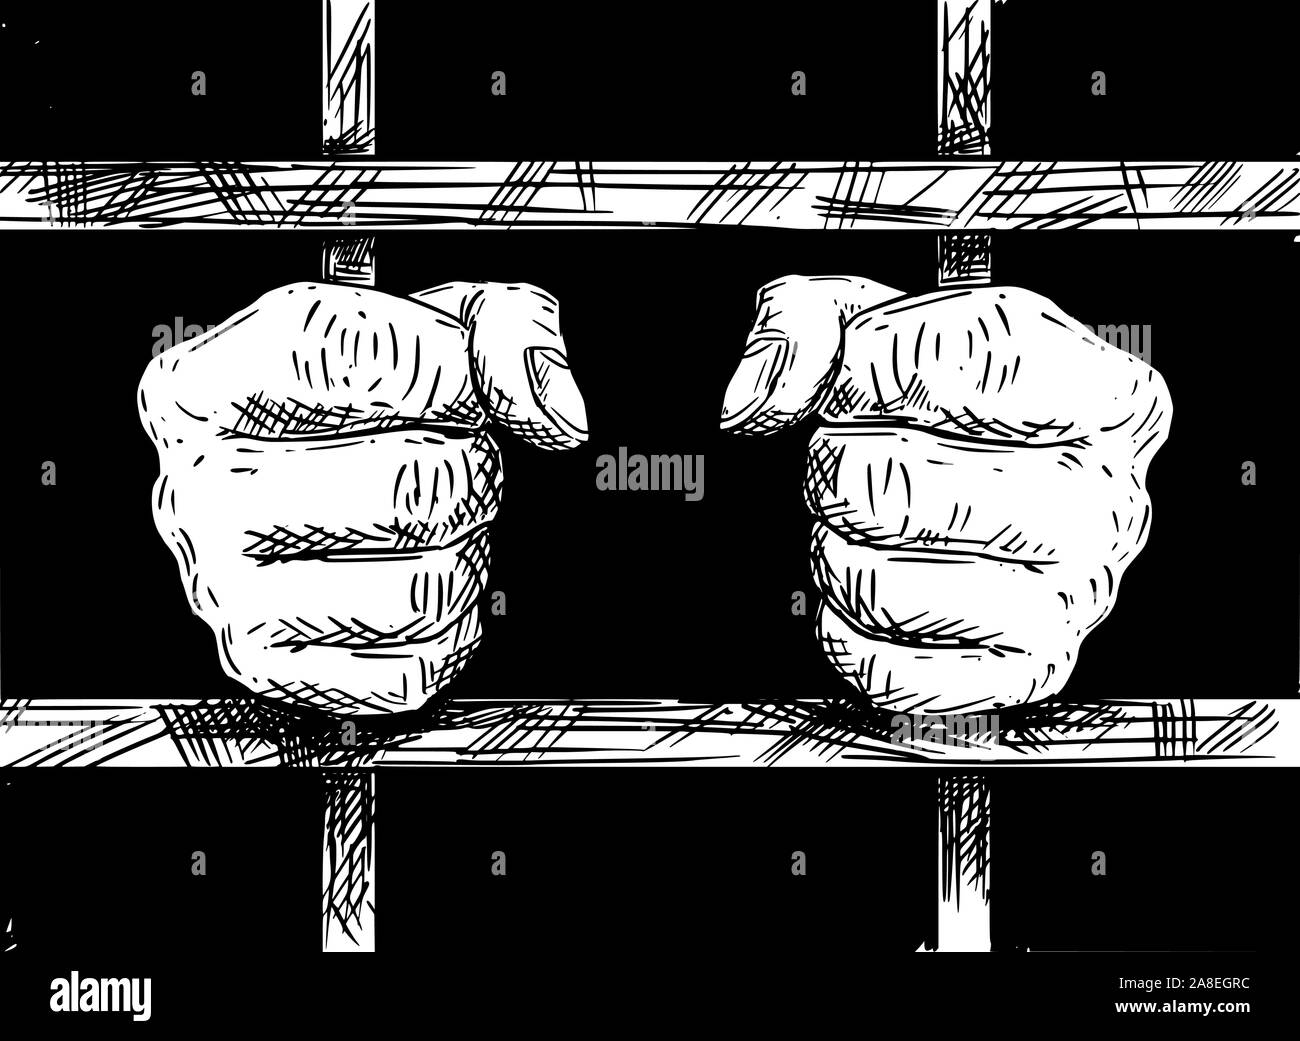 Vector black and white artistic drawing of hands of prisoner in prison cell holding iron bars. Stock Vector